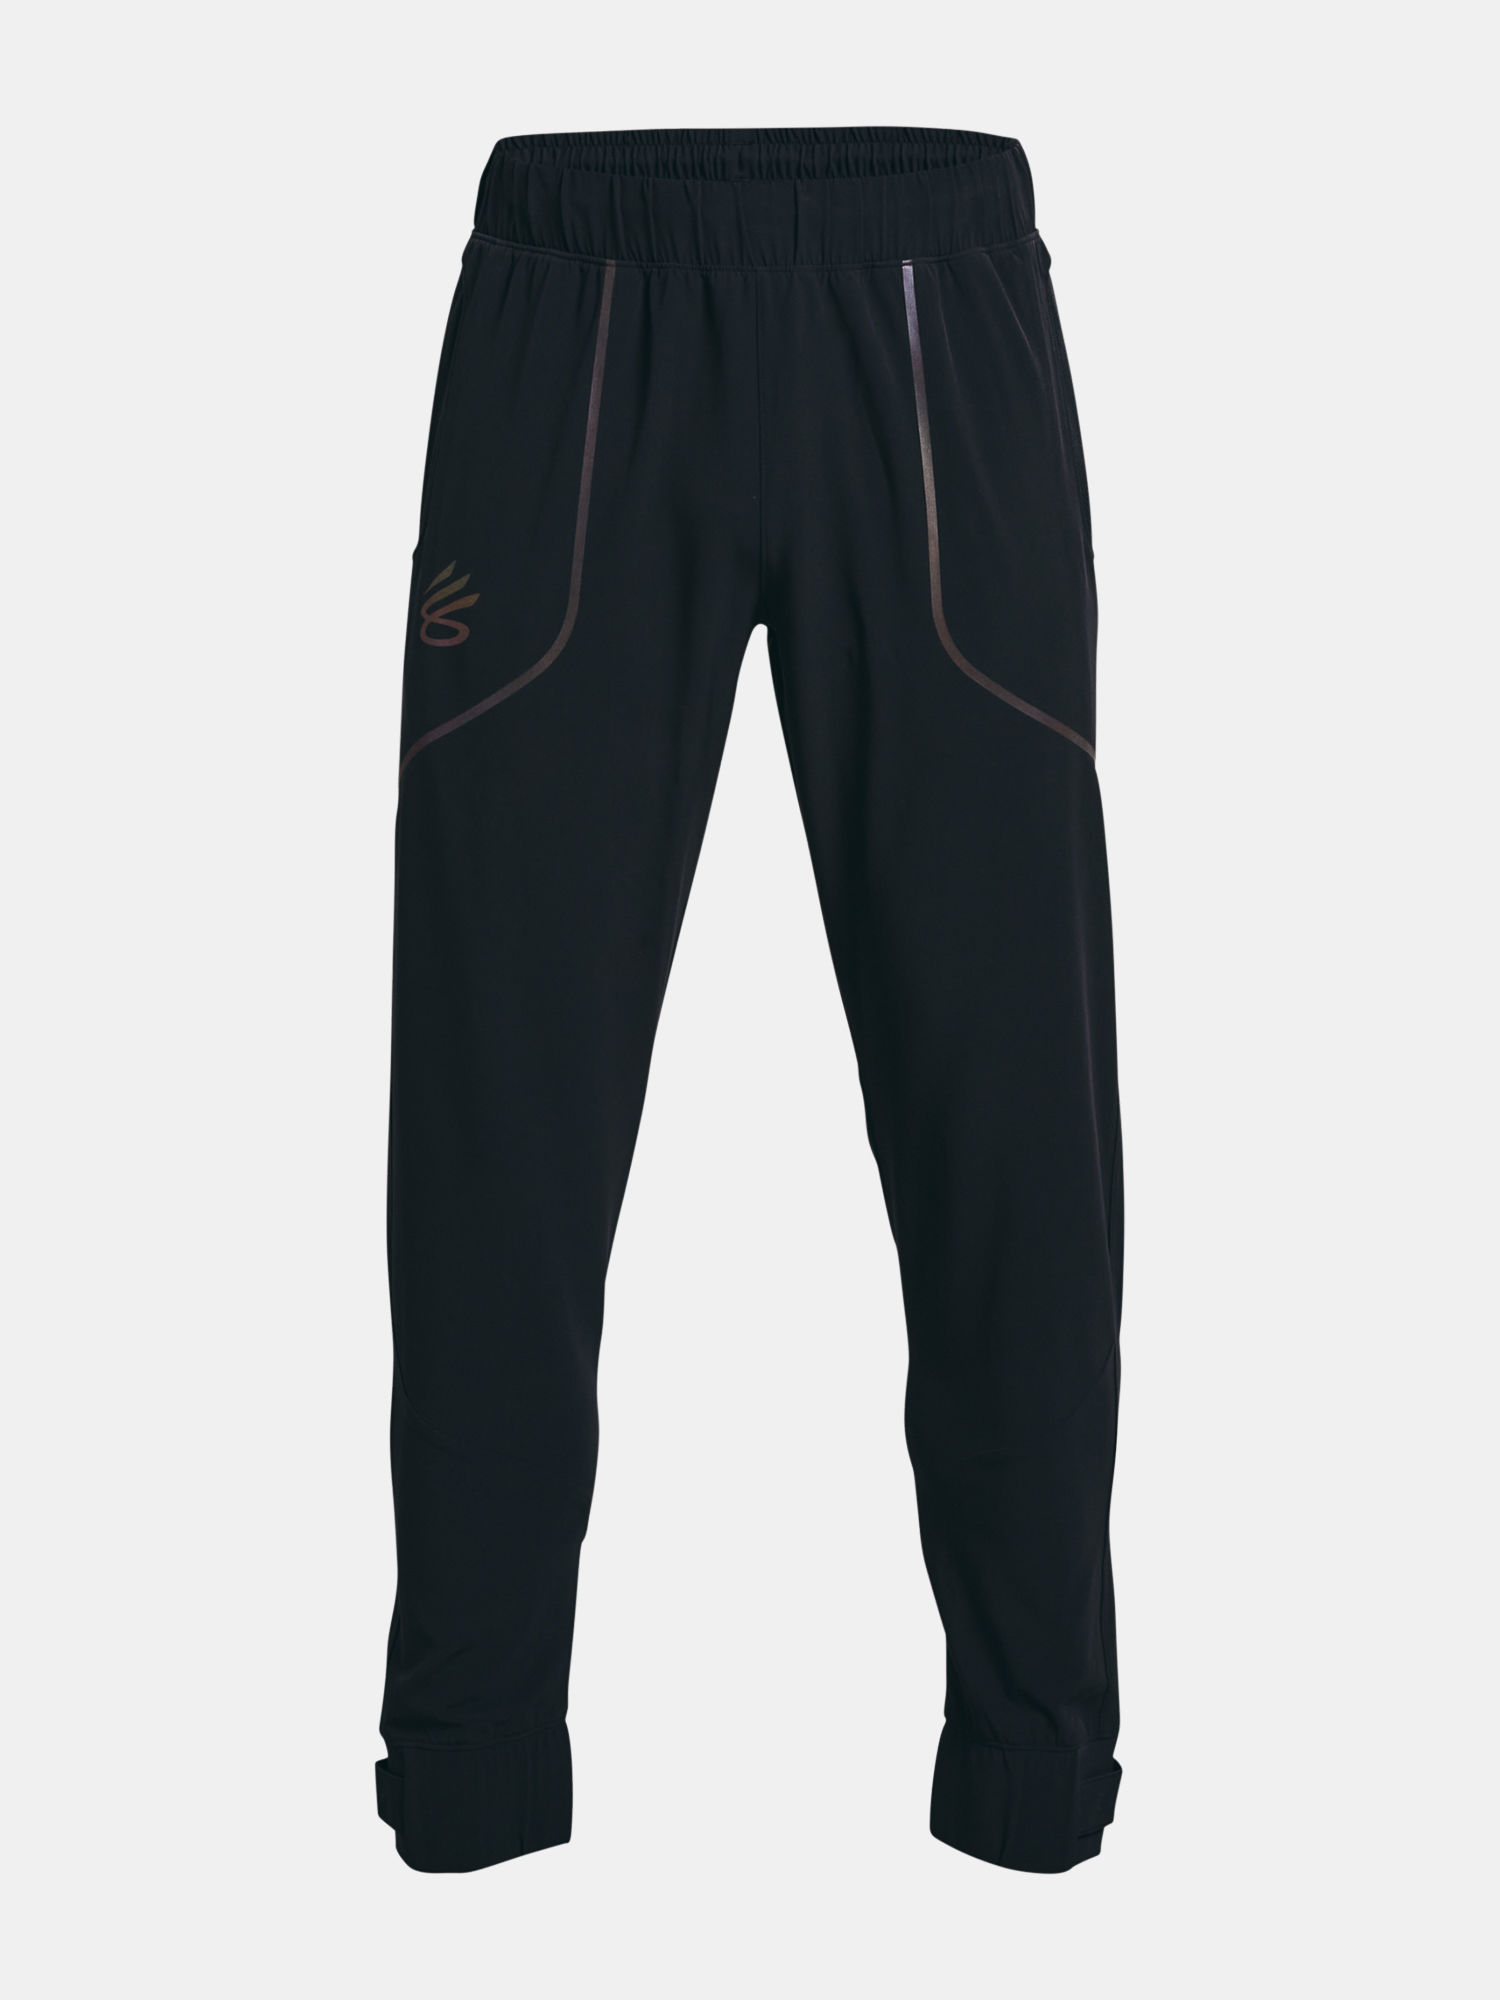 Nohavice Under Armour CURRY UNDRTD ALL STAR PANT-BLK (3)